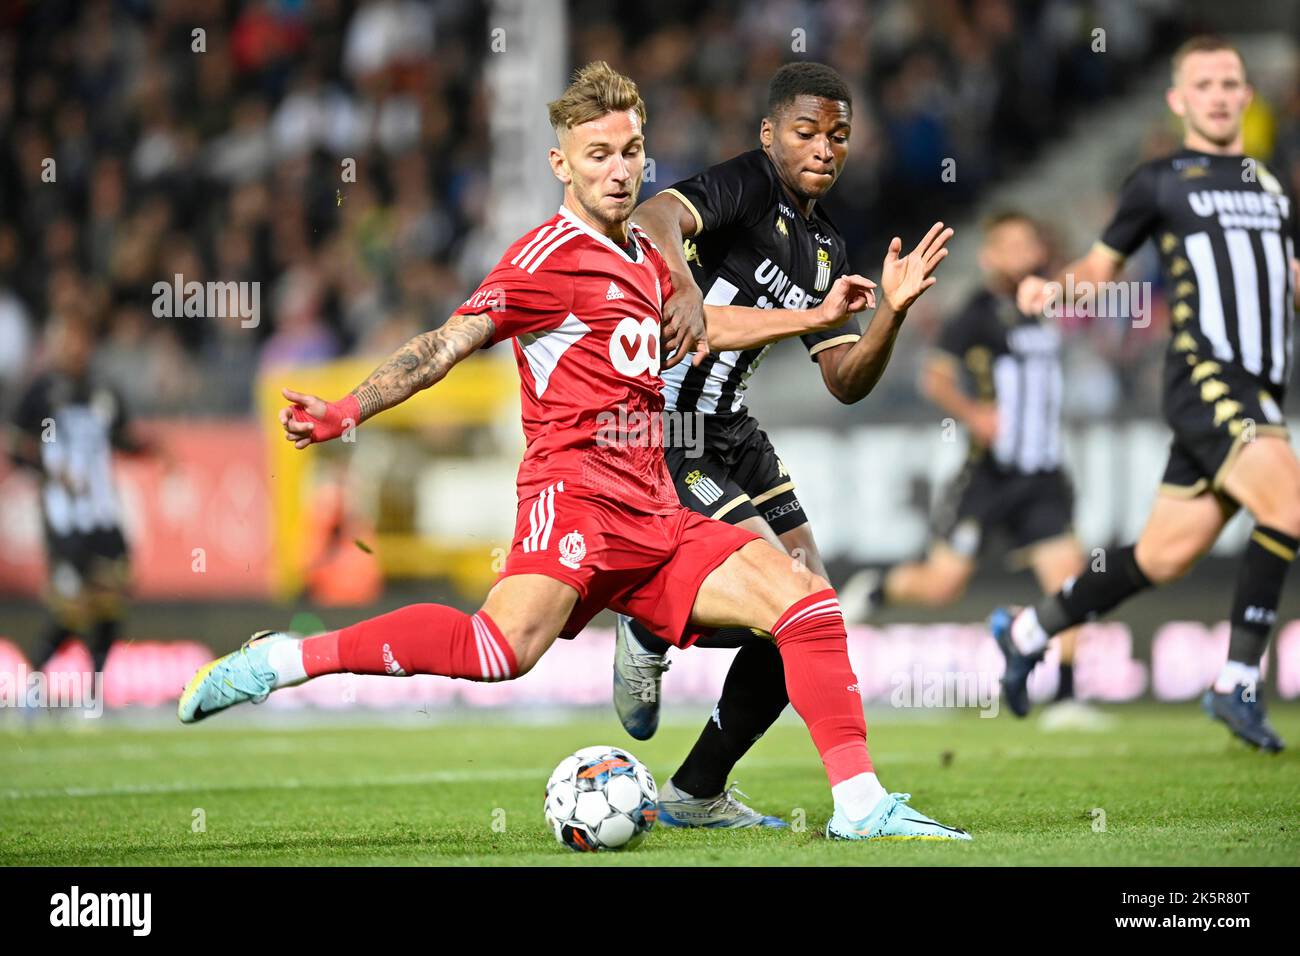 Standard's Denis Dragus and Charleroi's Loic Bessile fight for the ball during a soccer match between Sporting Charleroi and Standard Liege, Sunday 09 October 2022 in Charleroi, on day 11 of the 2022-2023 'Jupiler Pro League' first division of the Belgian championship. BELGA PHOTO JOHN THYS Stock Photo